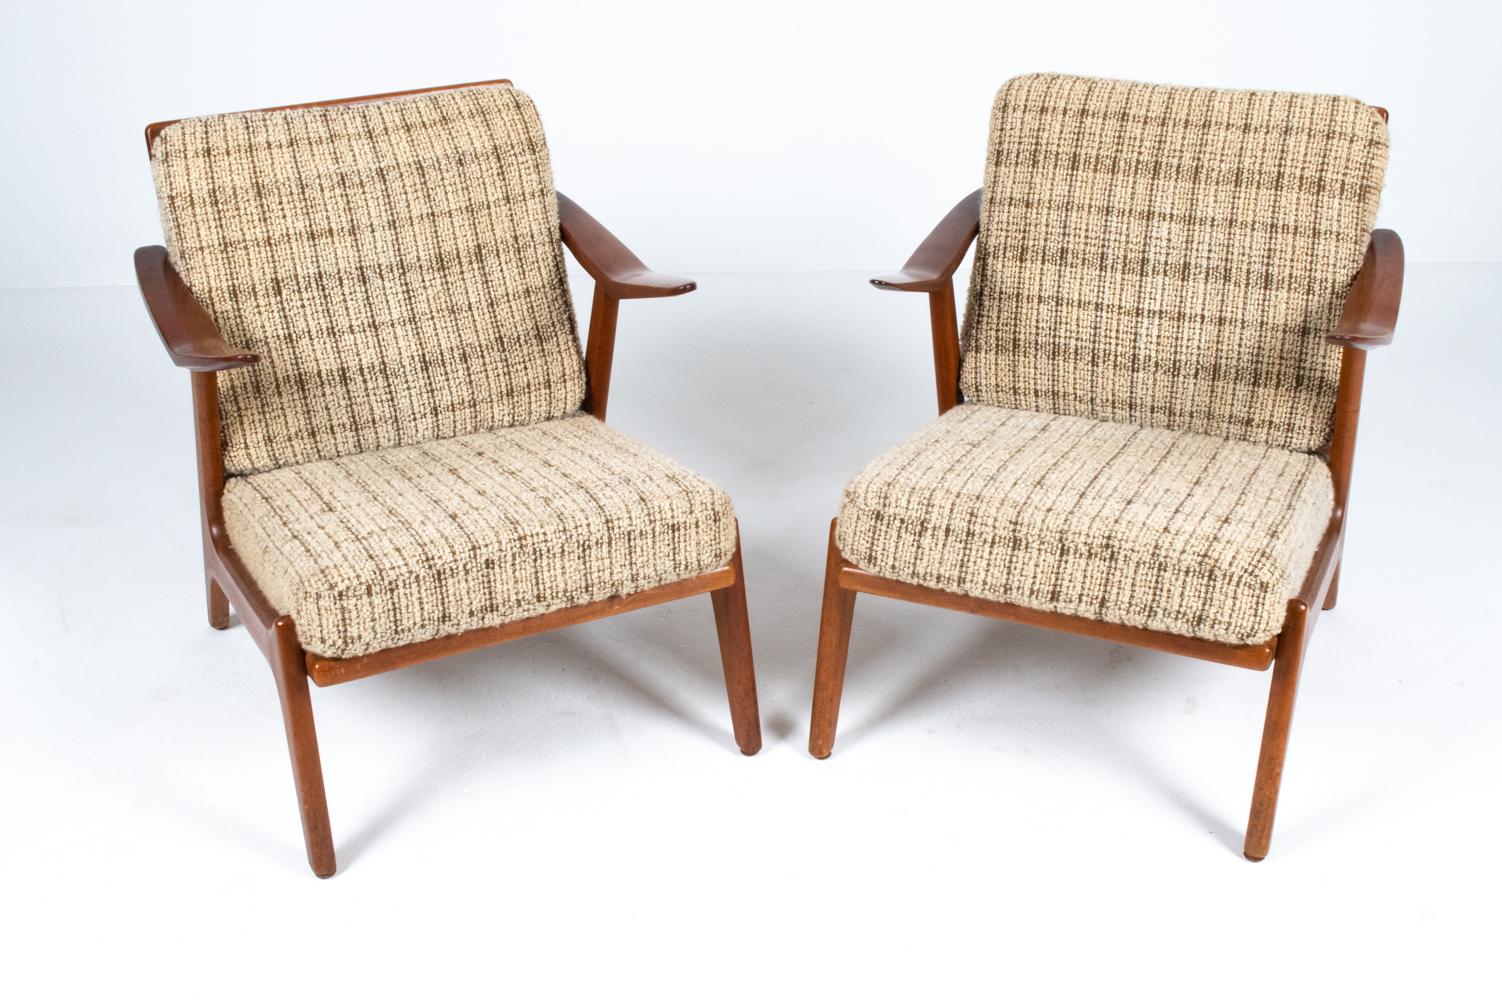 One of the more iconic designs of Danish mid-20th century furniture designer H. Brockmann-Petersen, these attractive lounge chairs feature sculptural frames in well-crafted teak wood. Recognizable for their strong yet elegant angular forms, these